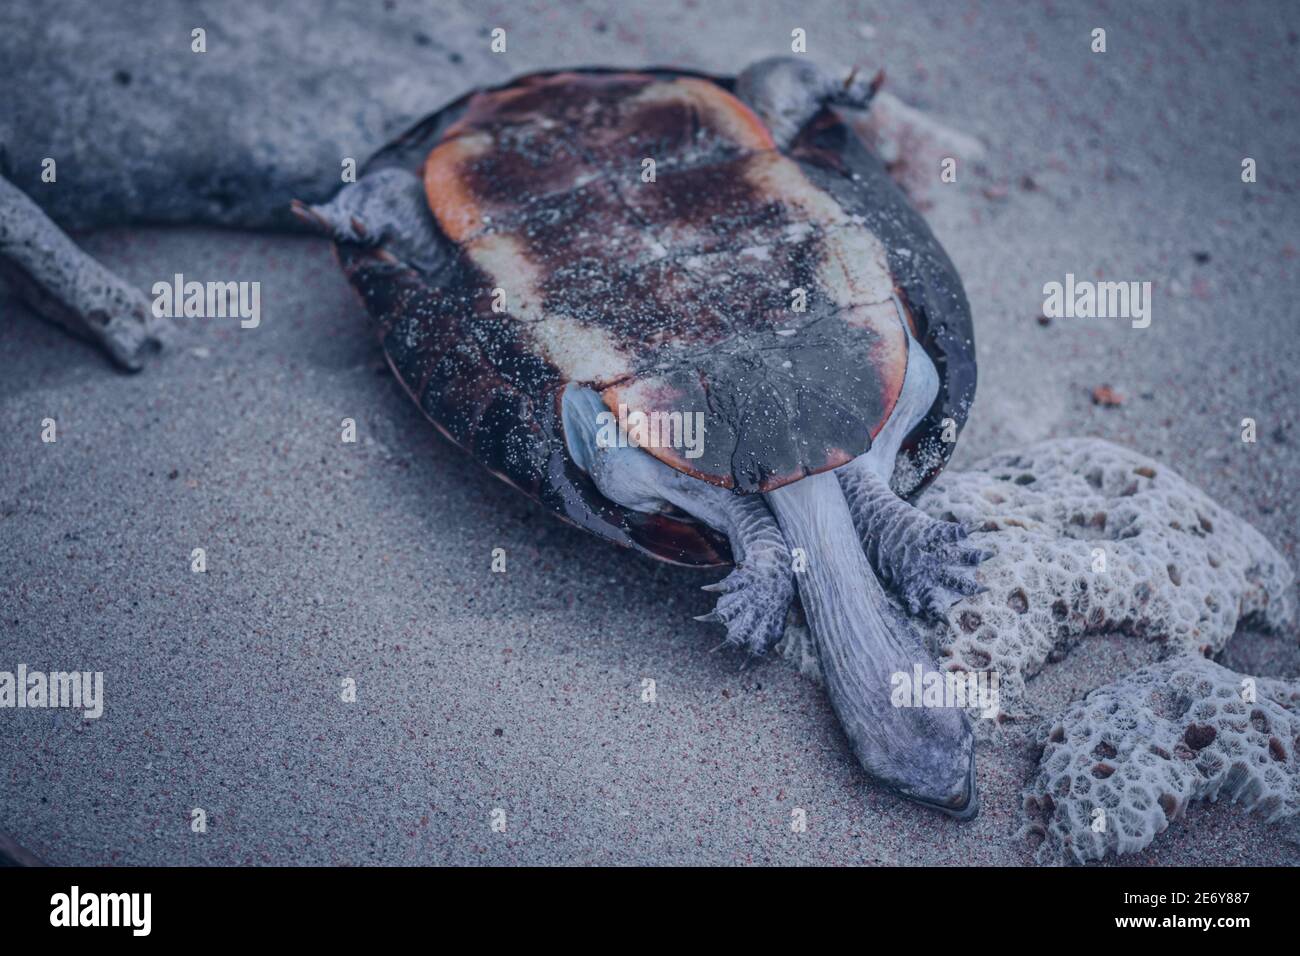 Dead shelled turtle corpse washed up in a beach upside down, land turtle drowned in seawater and ended up dead. Stock Photo